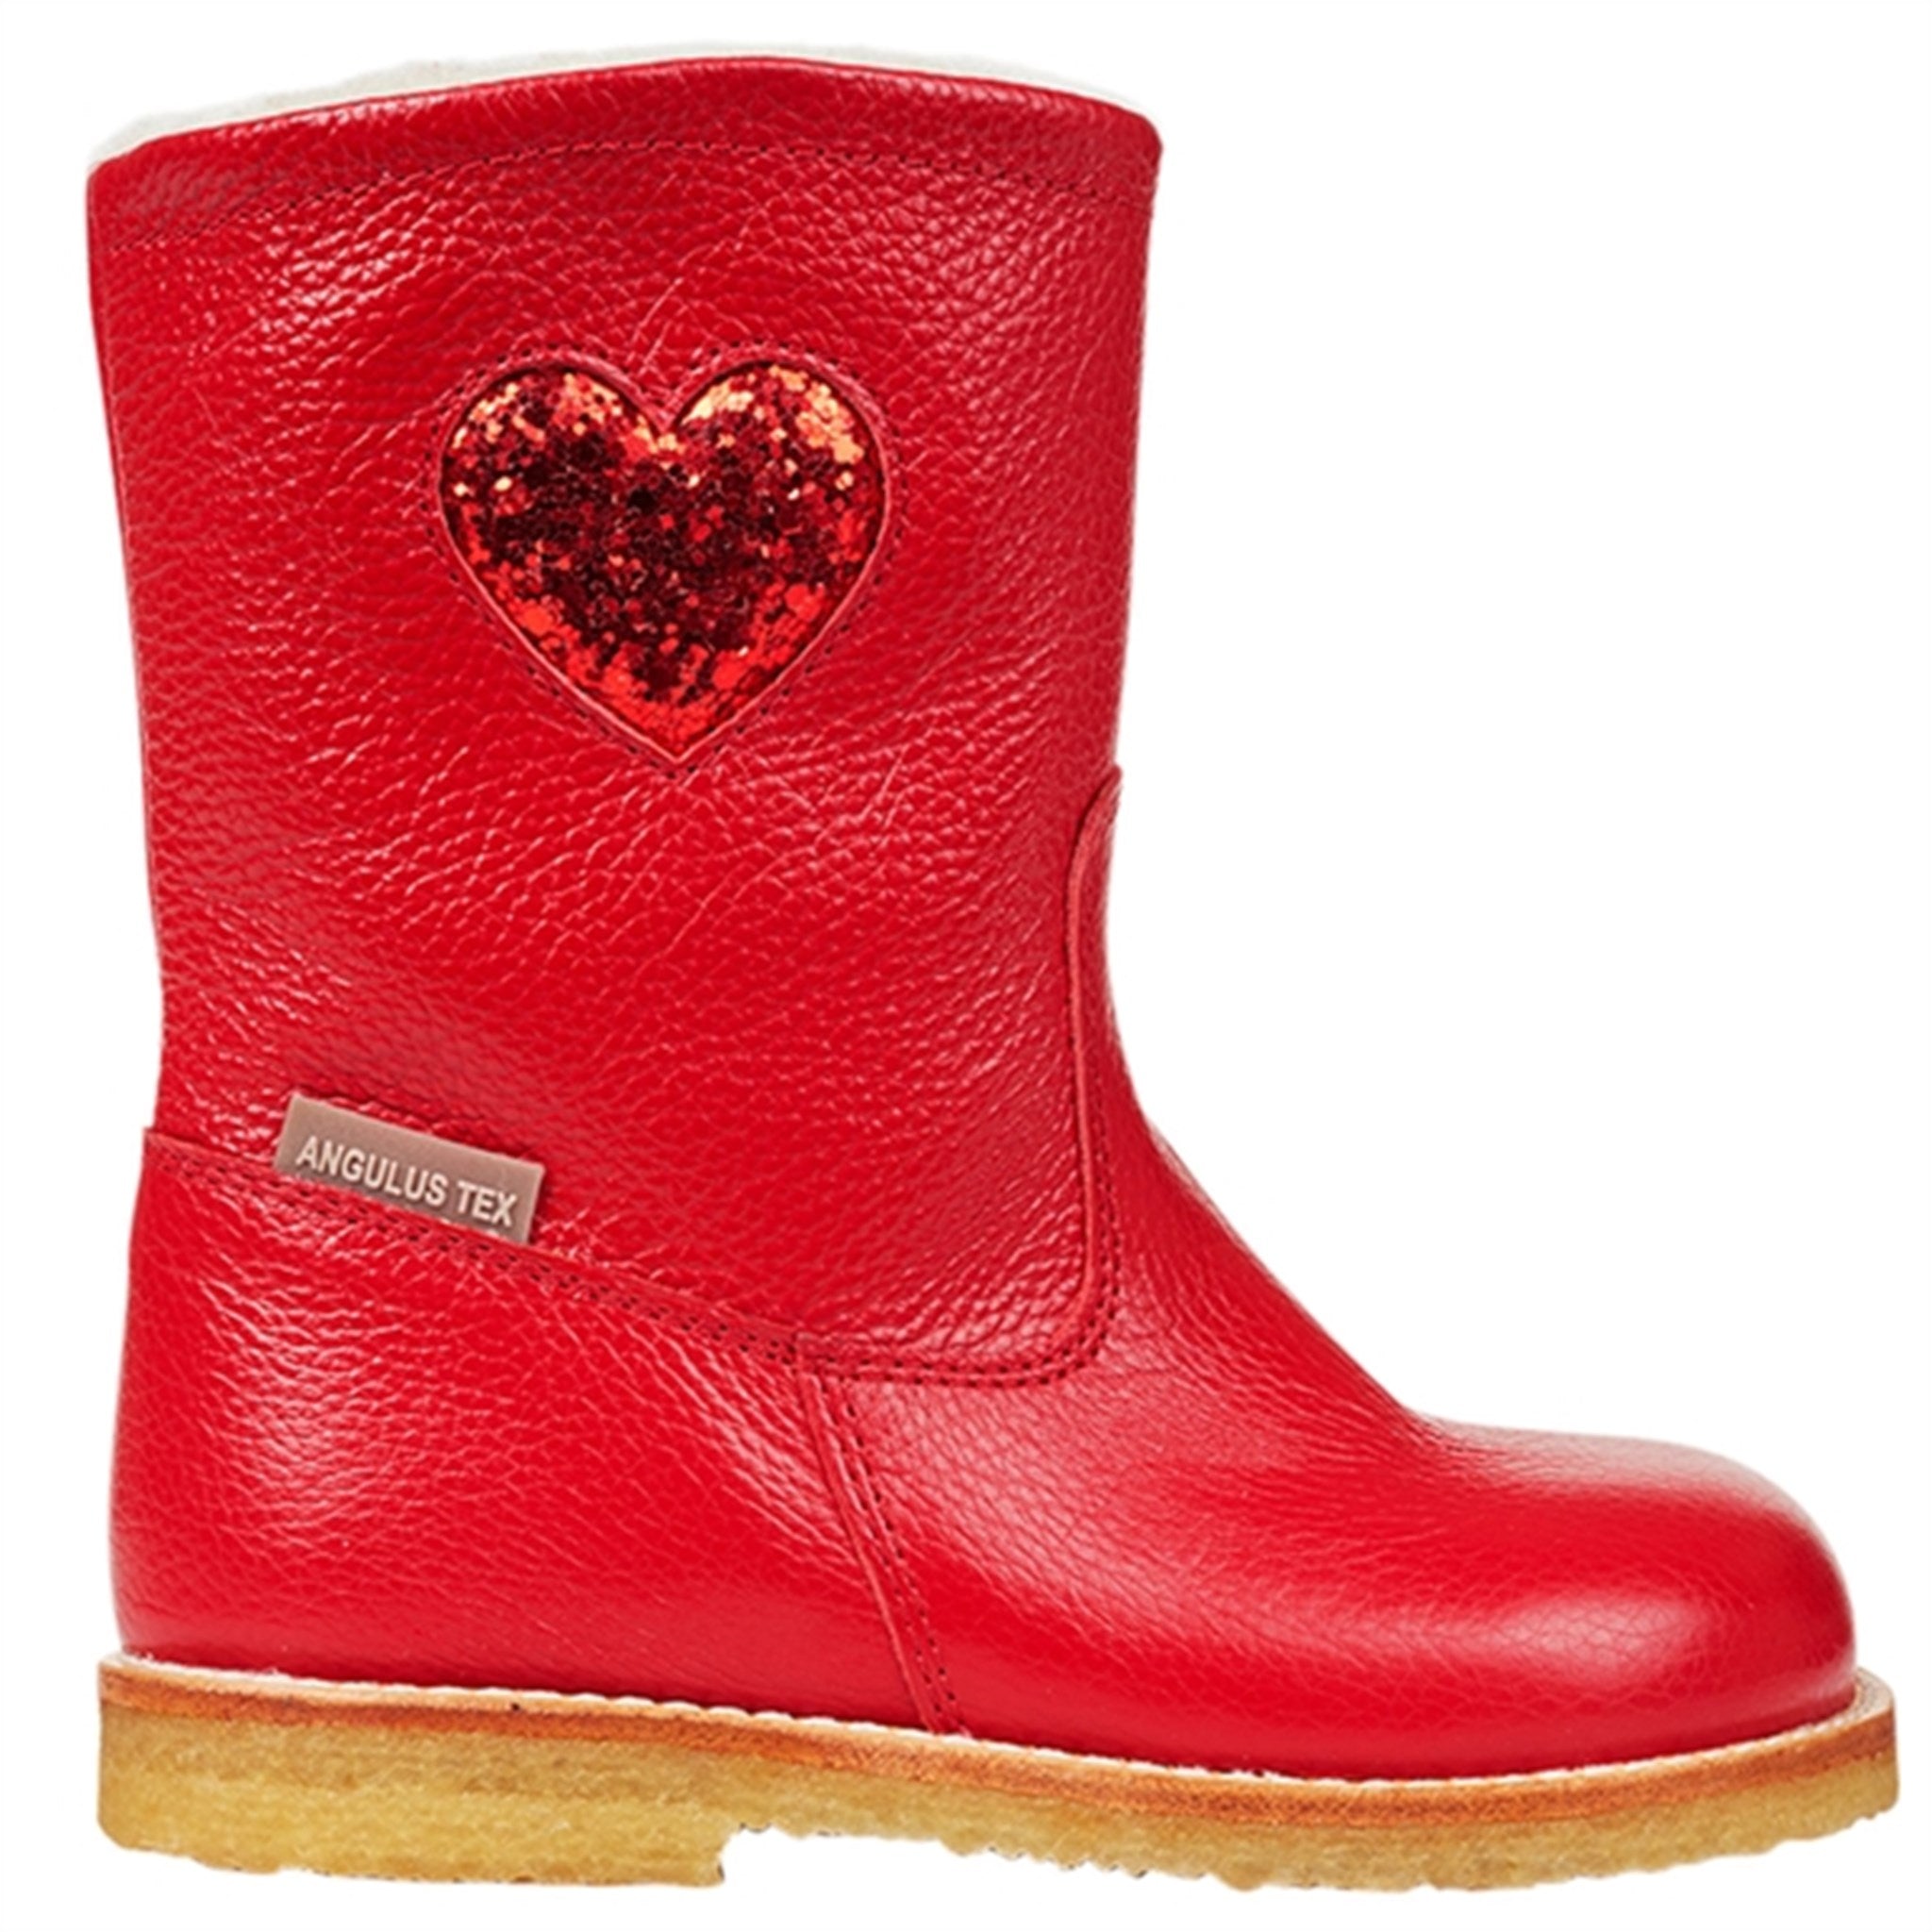 Angulus Tex-Boots With Zipper Red/Red Glitter 6